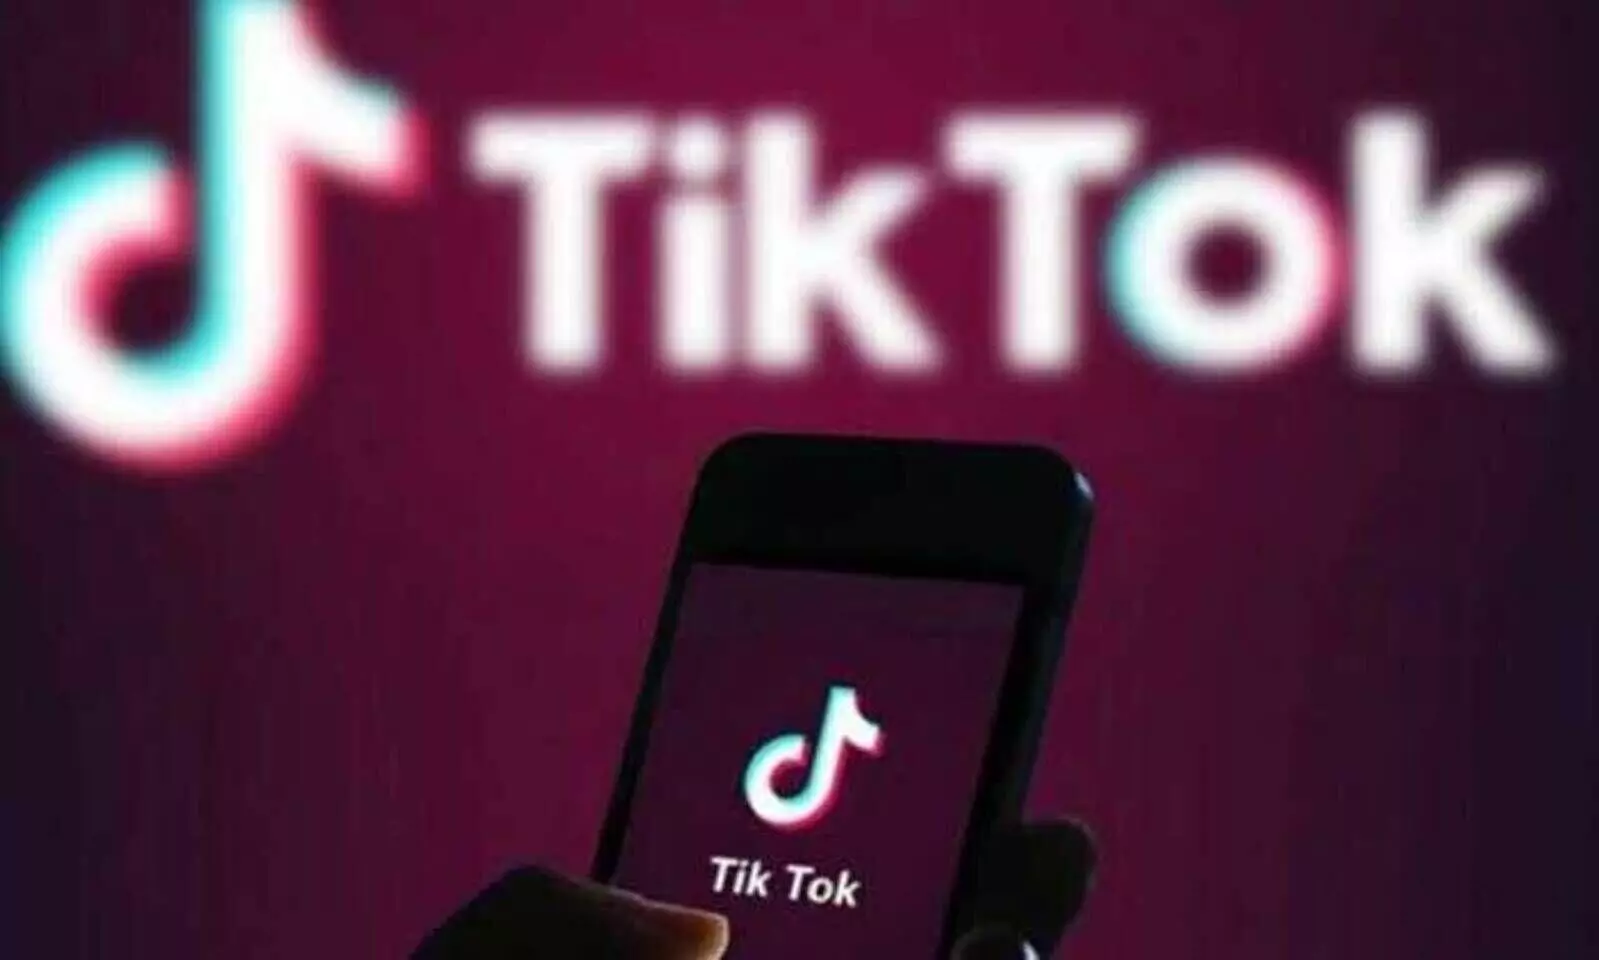 Hundreds of TikTok employees earlier worked for Chinese state media: report